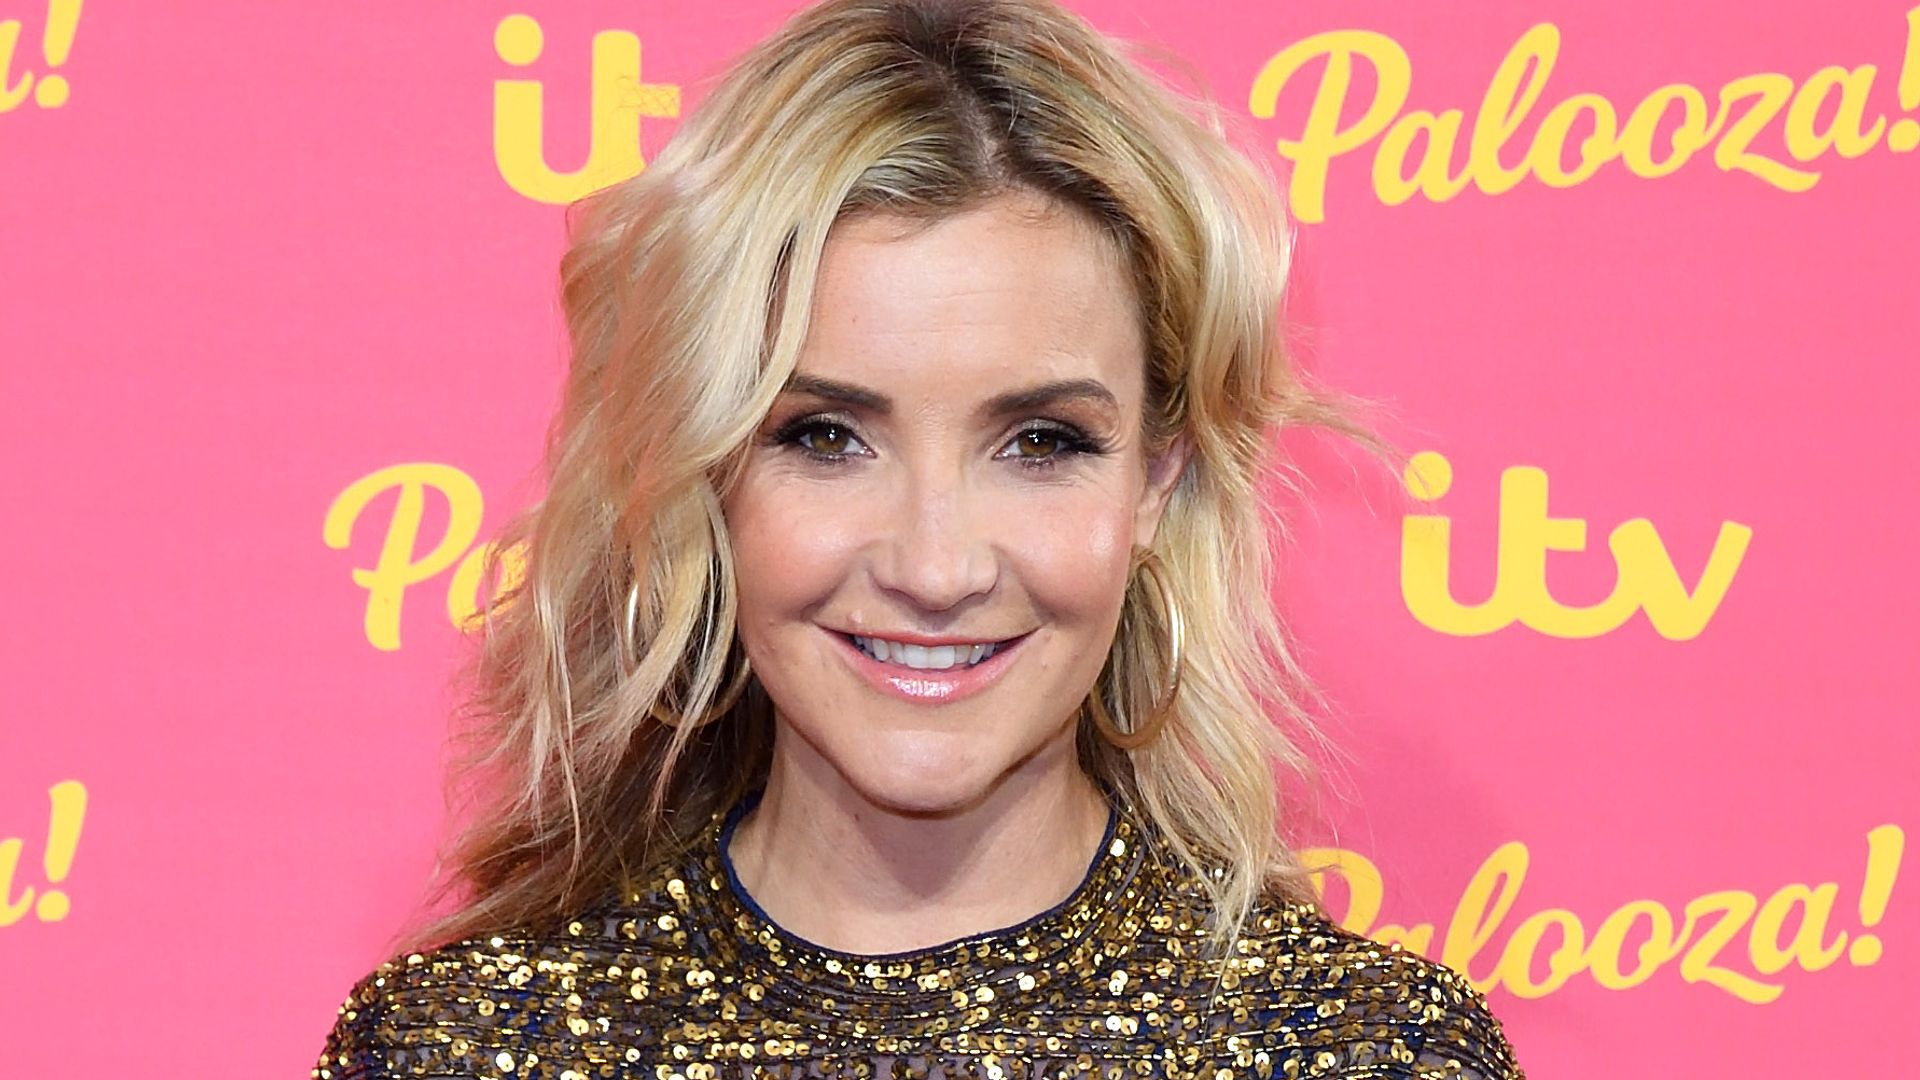 Helen Skelton attends the ITV Palooza 2019 at The Royal Festival Hall